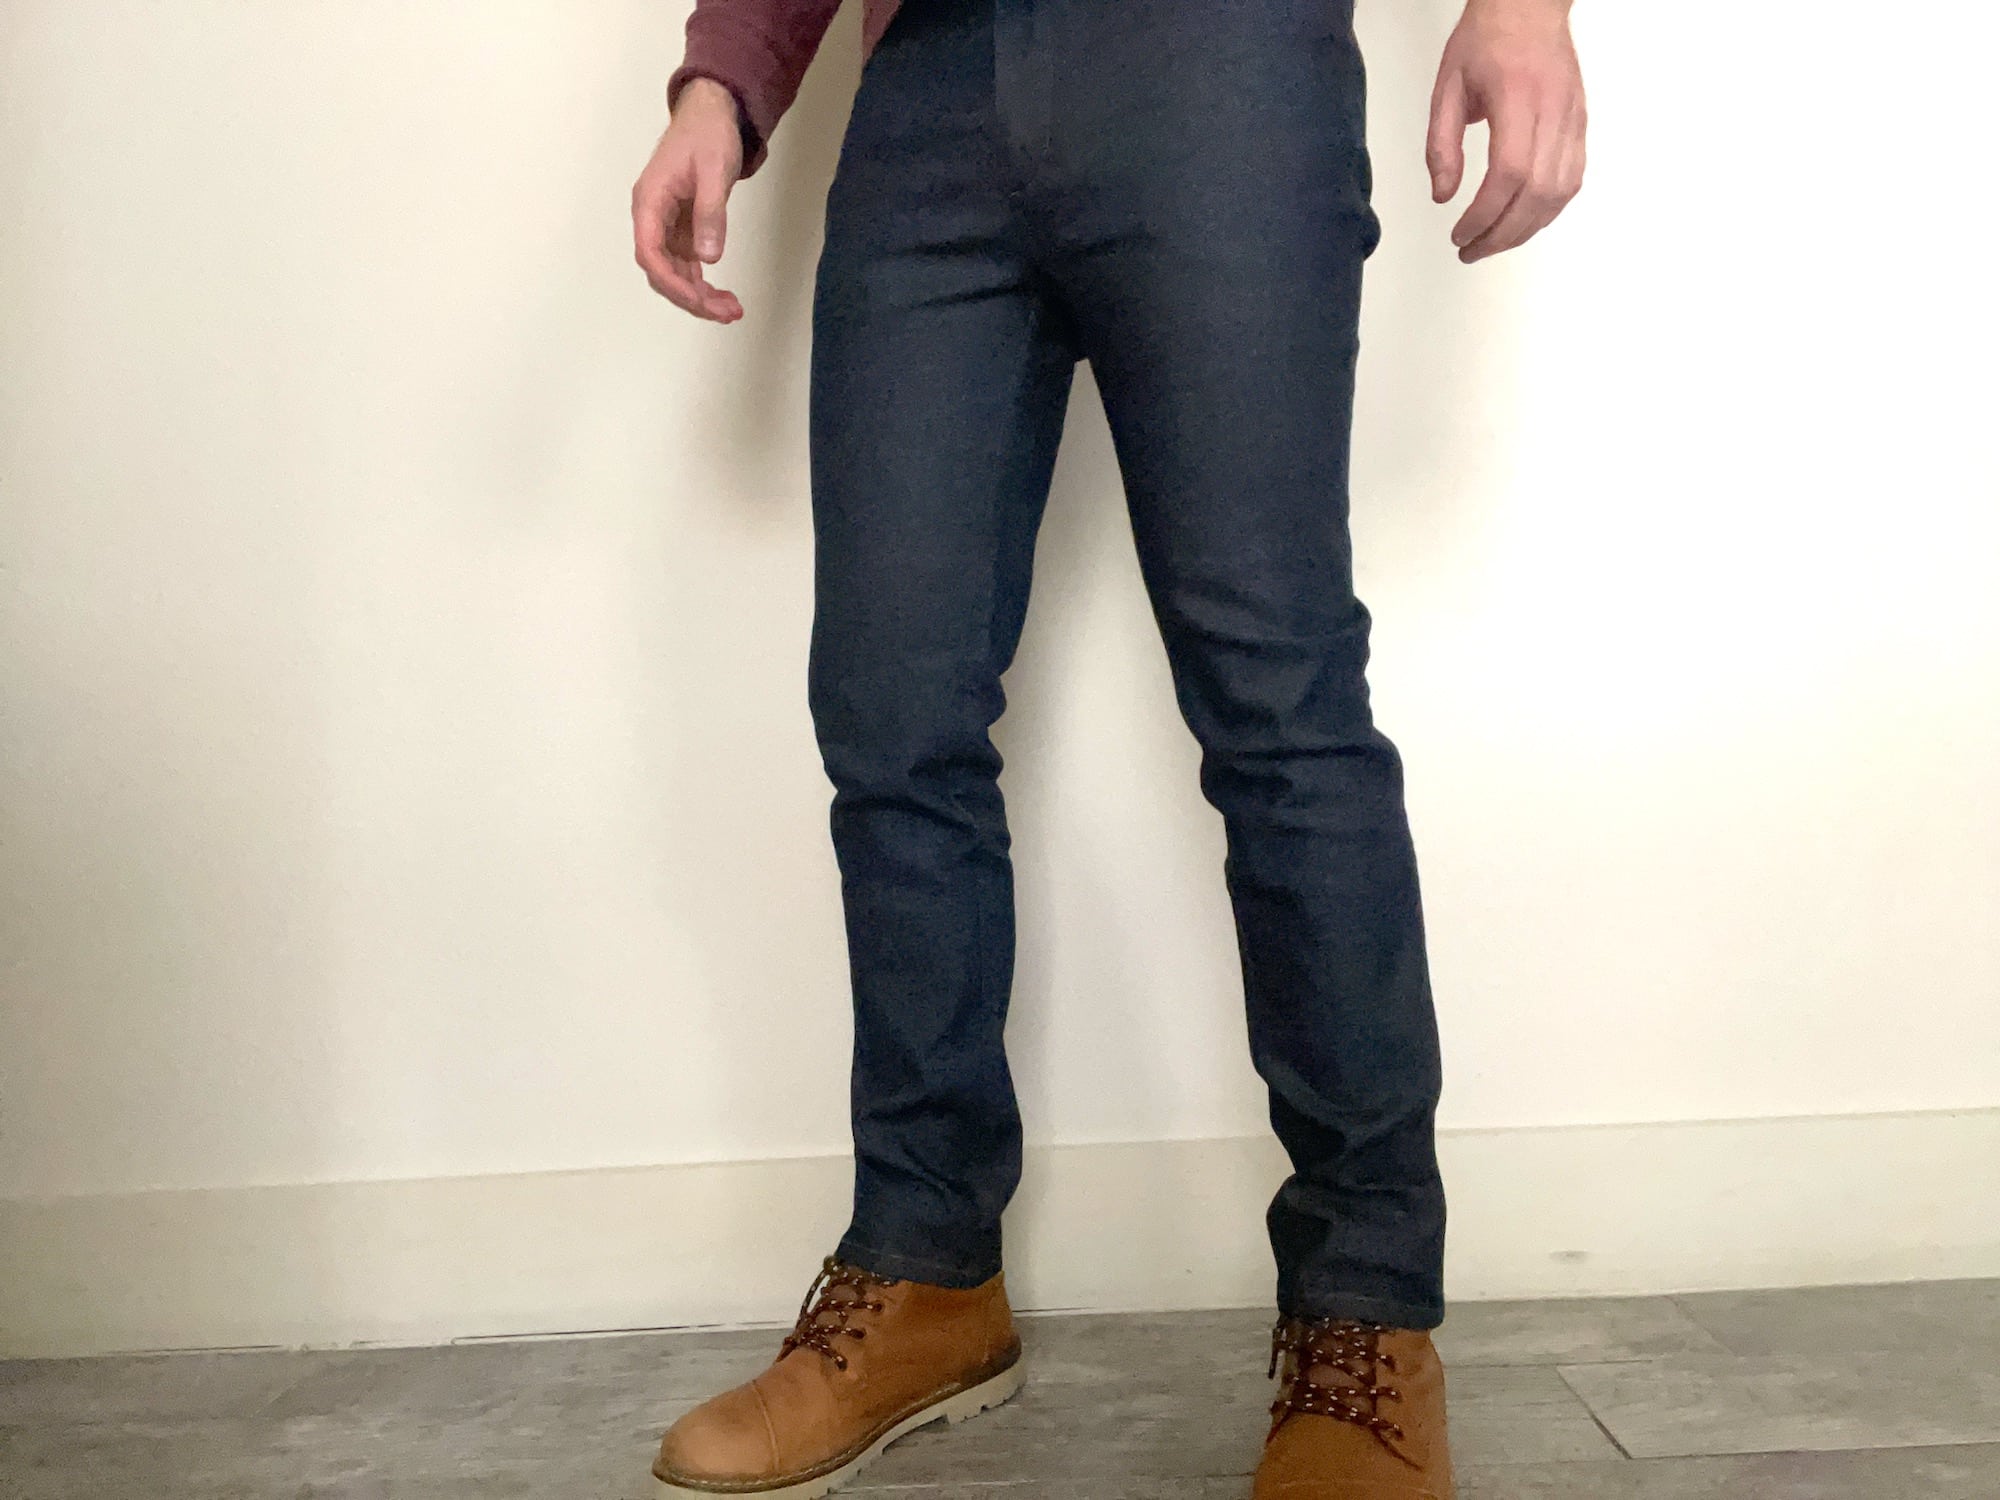 A guy wears a pair of Mack Weldon jeans standing against a white wall